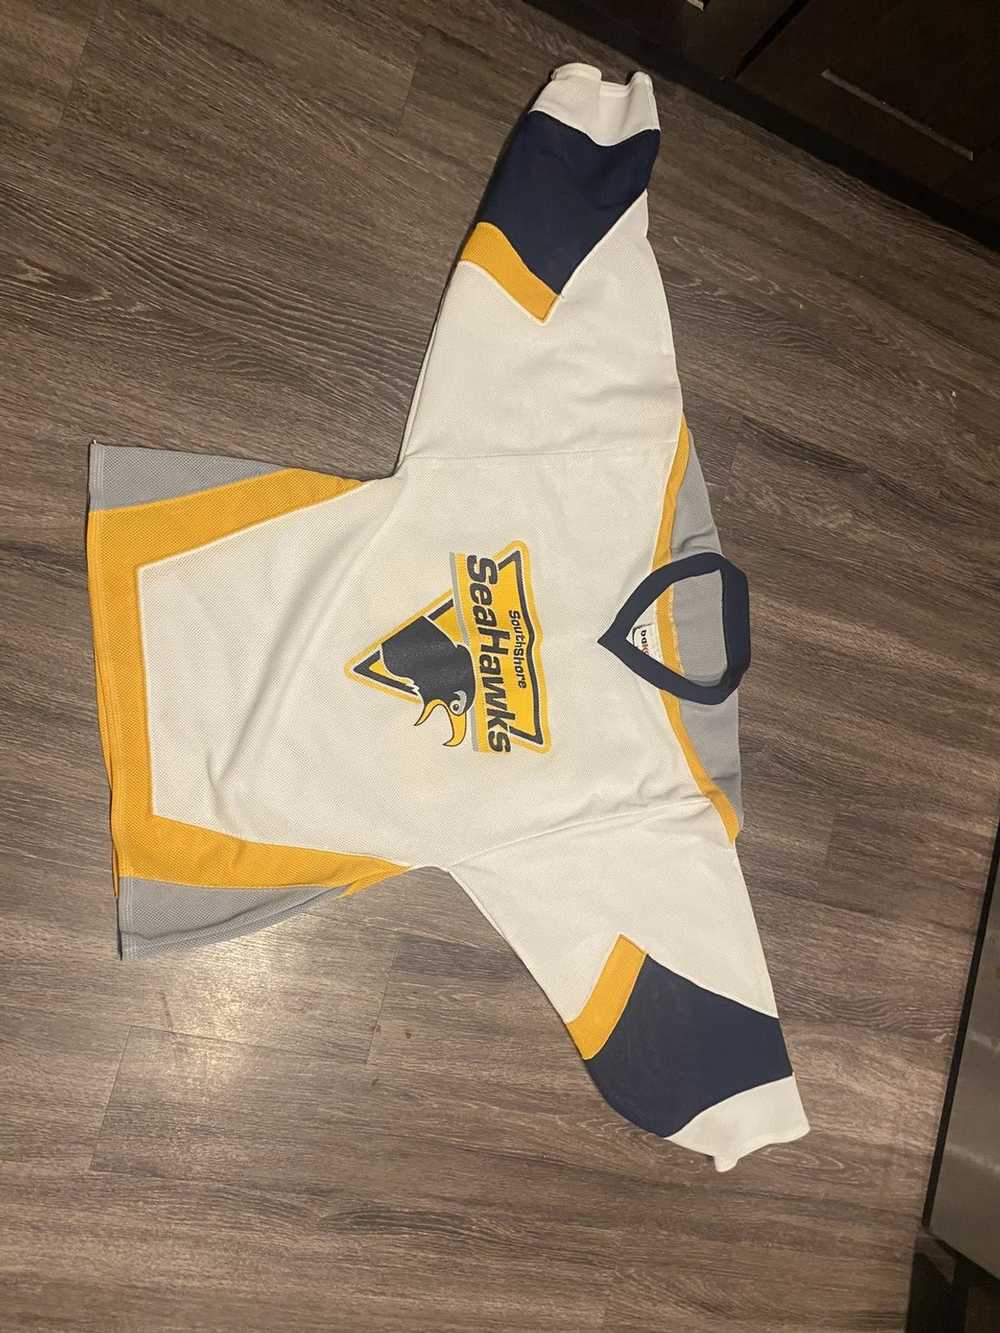 Irving 12 Canisius College White Navy Blue and Old Gold Hockey Jersey —  BORIZ